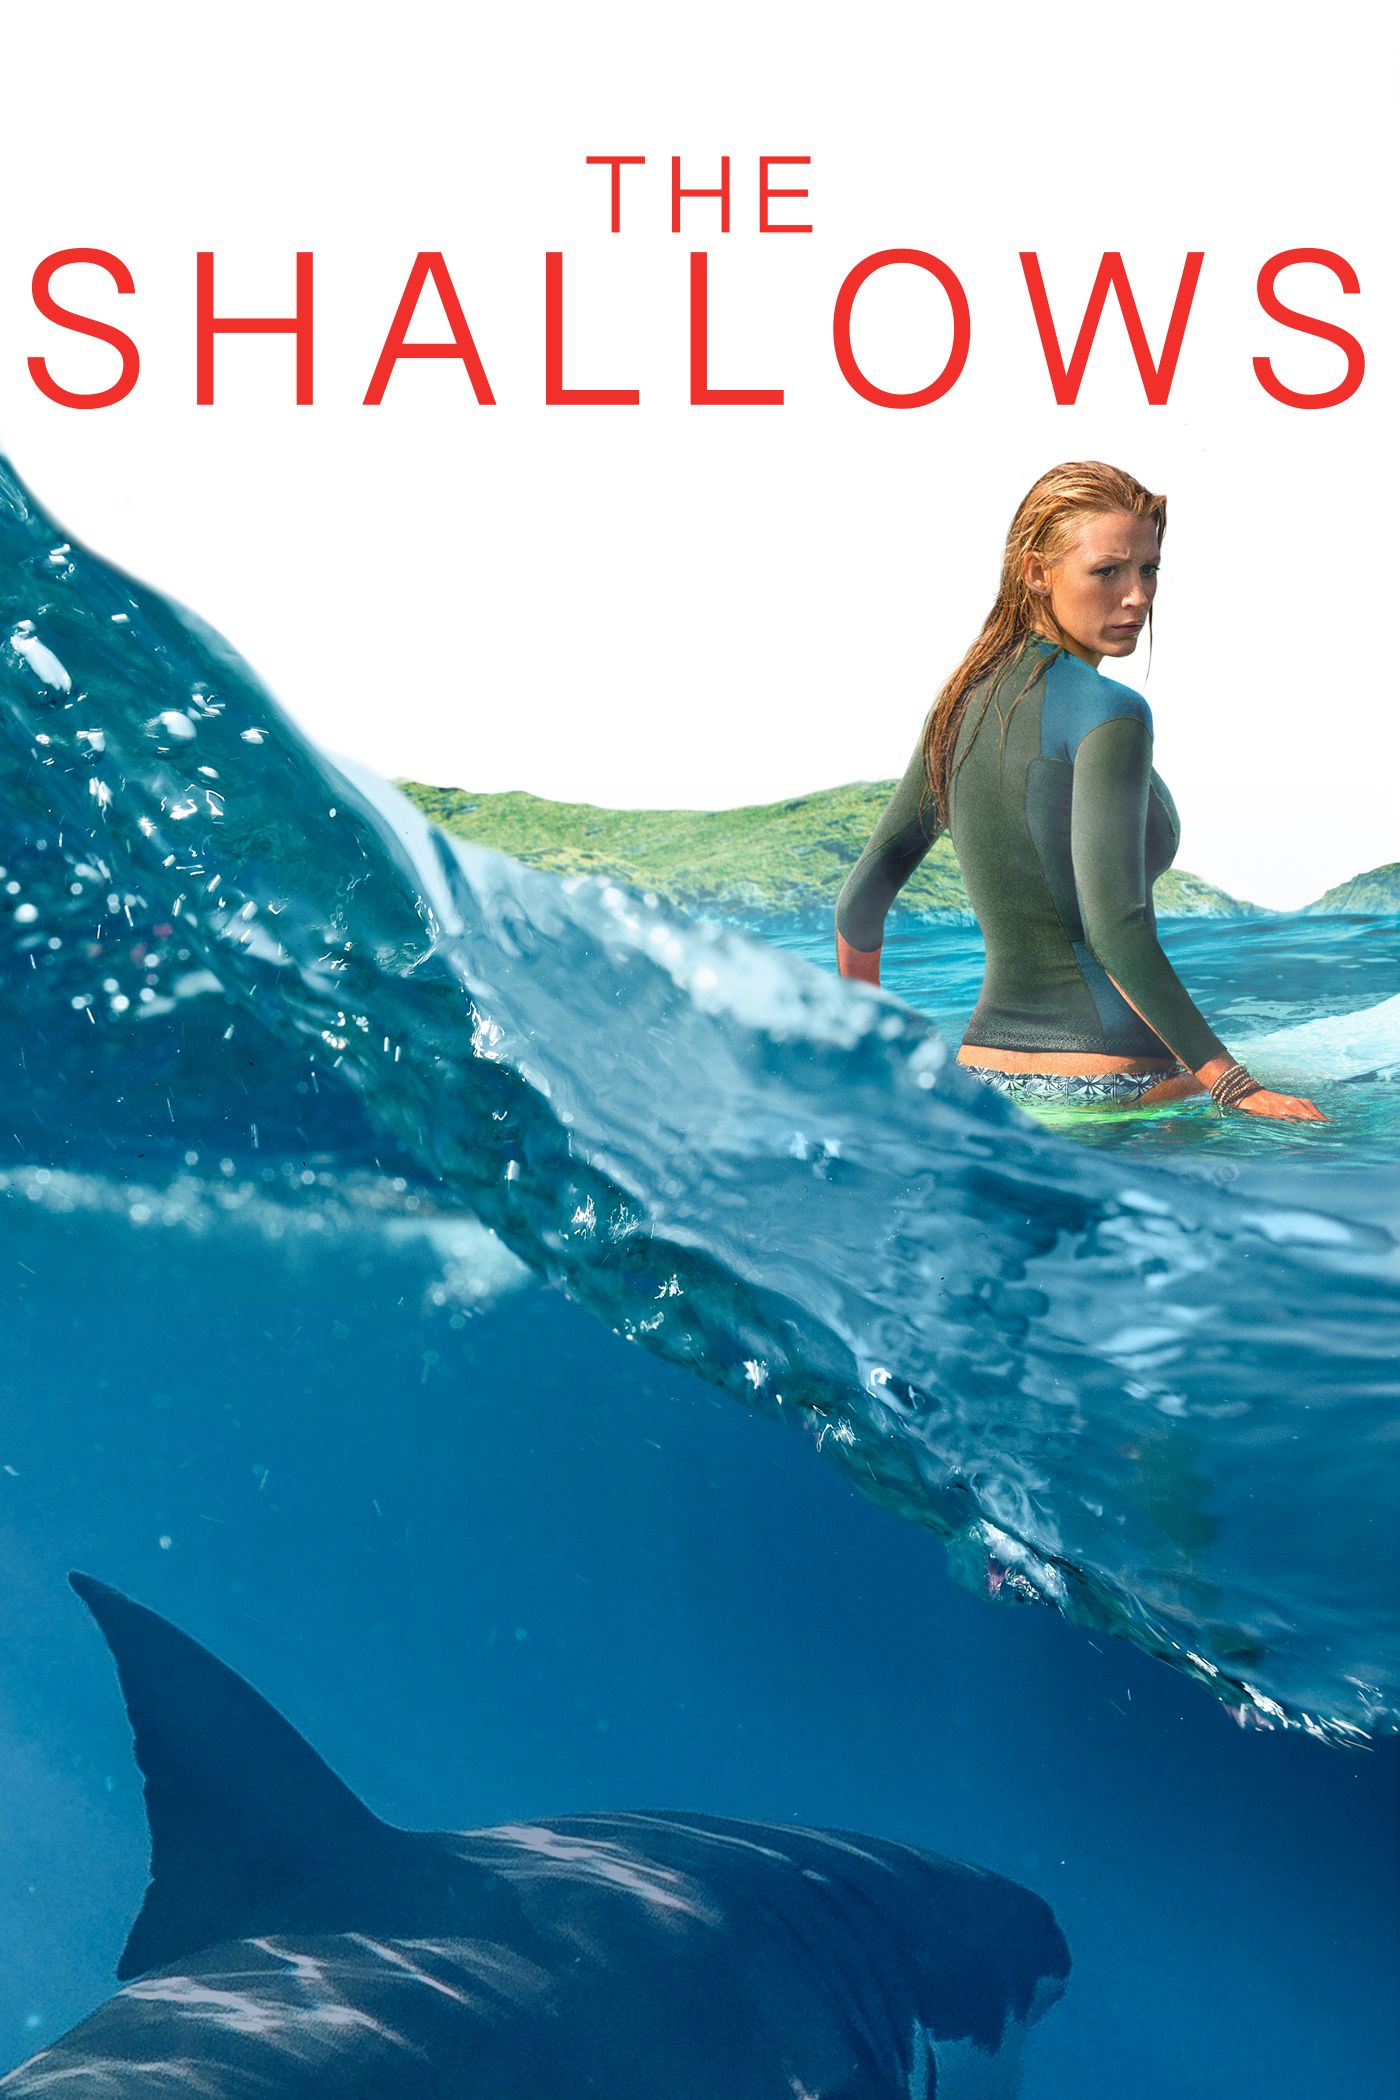 the shallows full movie free watch